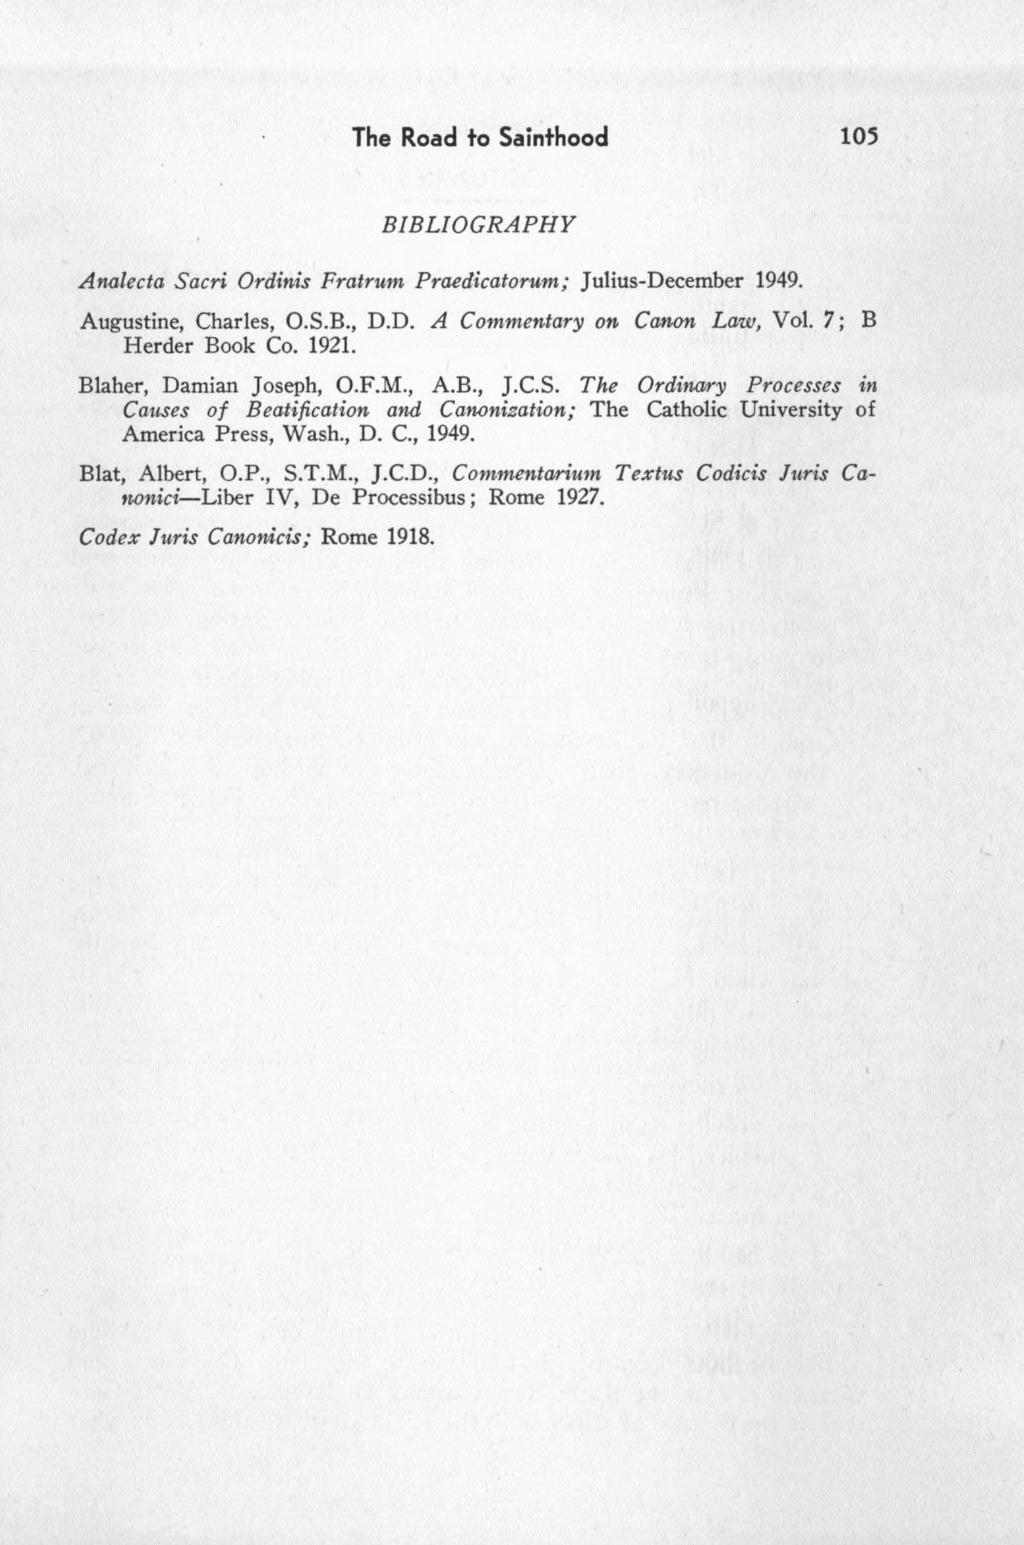 The Road to Sainthood 105 BIBLIOGRAPHY Analecta Sacri Ordinis Fratrum Praedicatorum; Julius-December 1949. Augustine, Charles, O.S.B., D.D. A Commentary on Ca11-on Law, Vol. 7; B Herder Book Co. 1921.